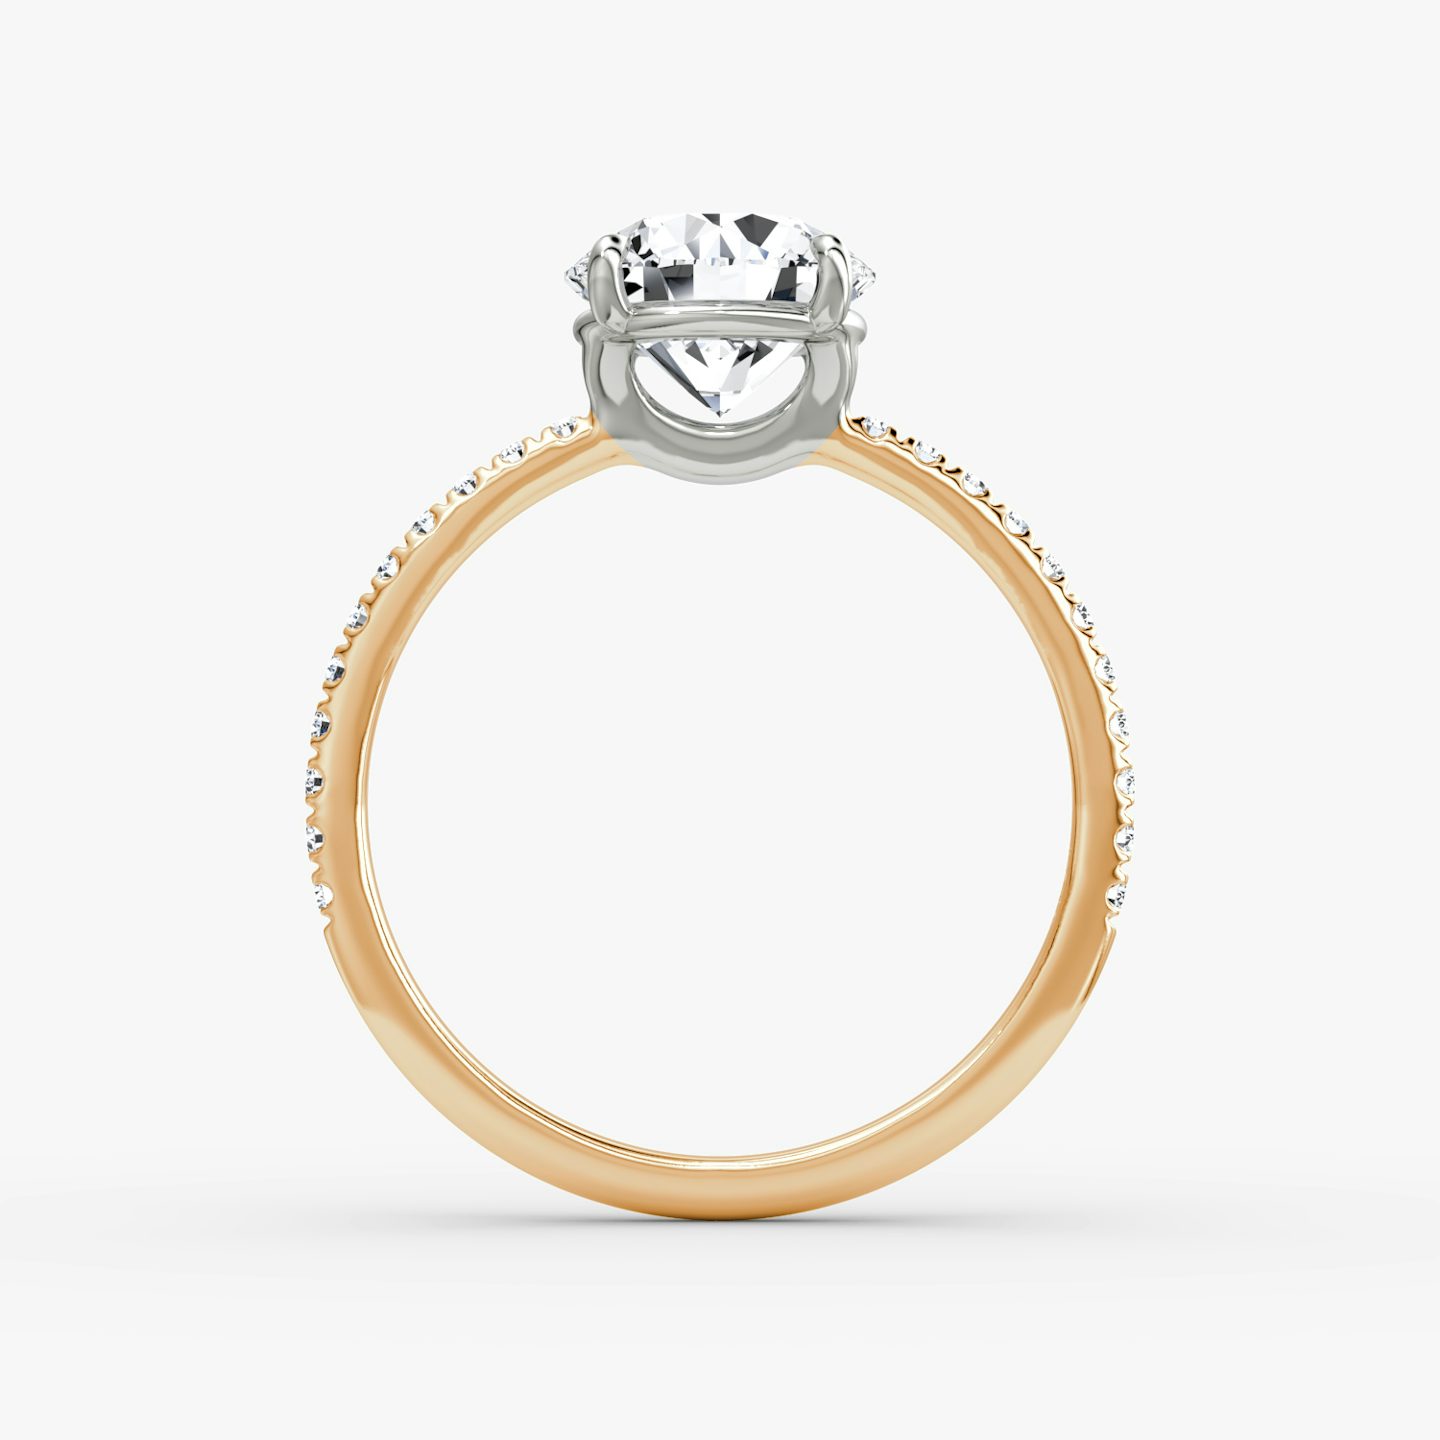 The Signature | Round Brilliant | 14k | 14k Rose Gold and Platinum | Band: Pavé | Band width: Standard | Carat weight: 1 | Setting style: Plain | Diamond orientation: vertical